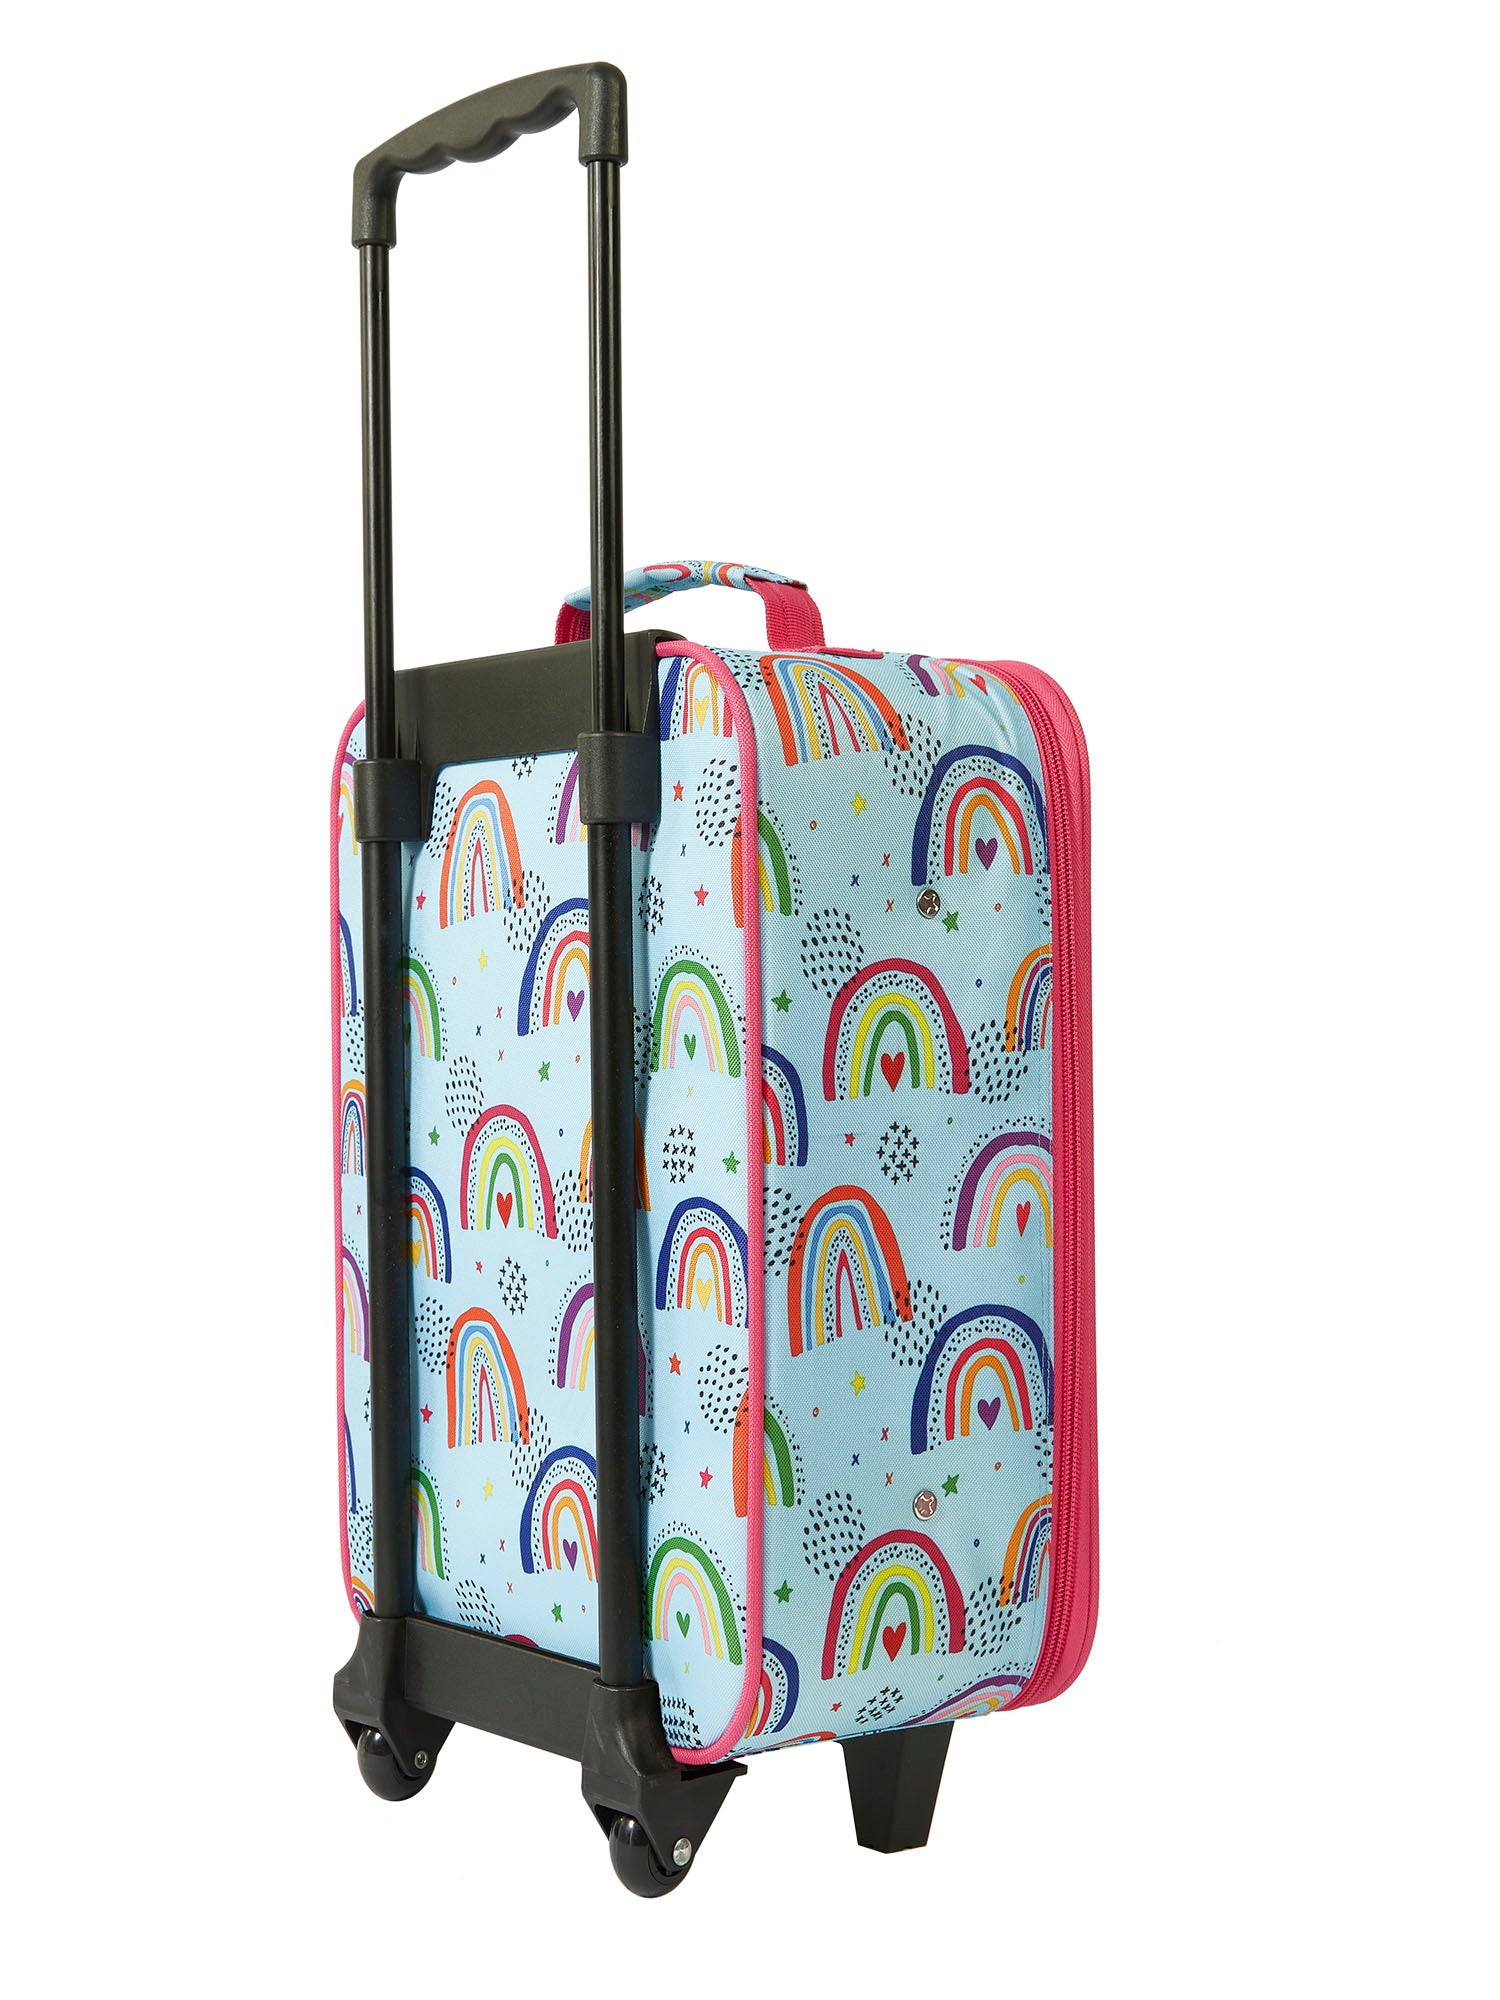 Best Suitcases for Kids' Carry-On Luggage - Go Green Travel Green